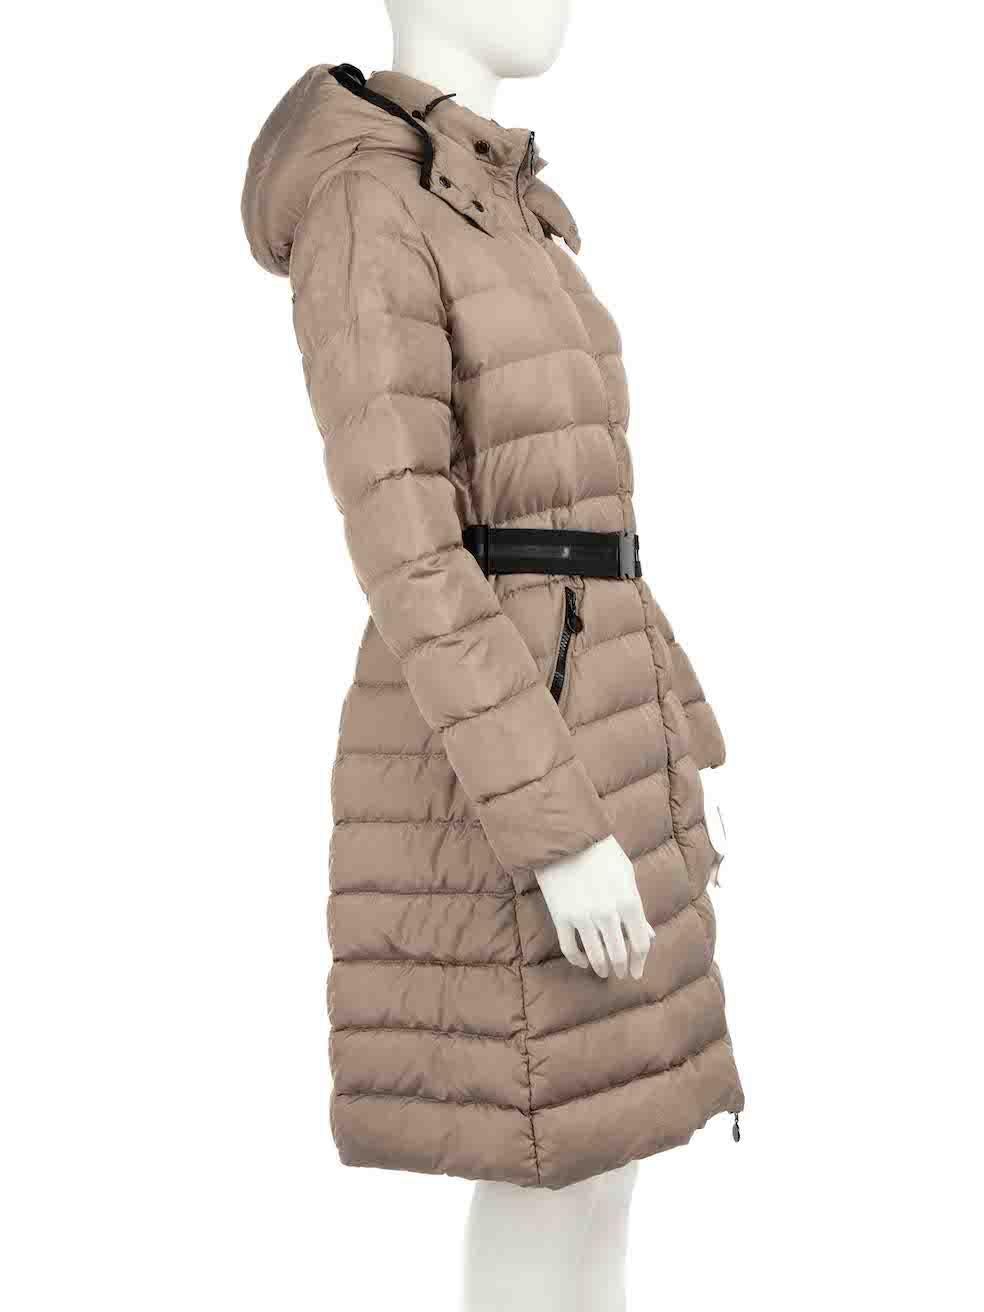 CONDITION is Good. General wear to coat is evident. Moderate signs of wear to the front, back and sleeves with water marks and plucks to the weave. The belt clasp also has chips to the paint on this used Moncler designer resale item.
